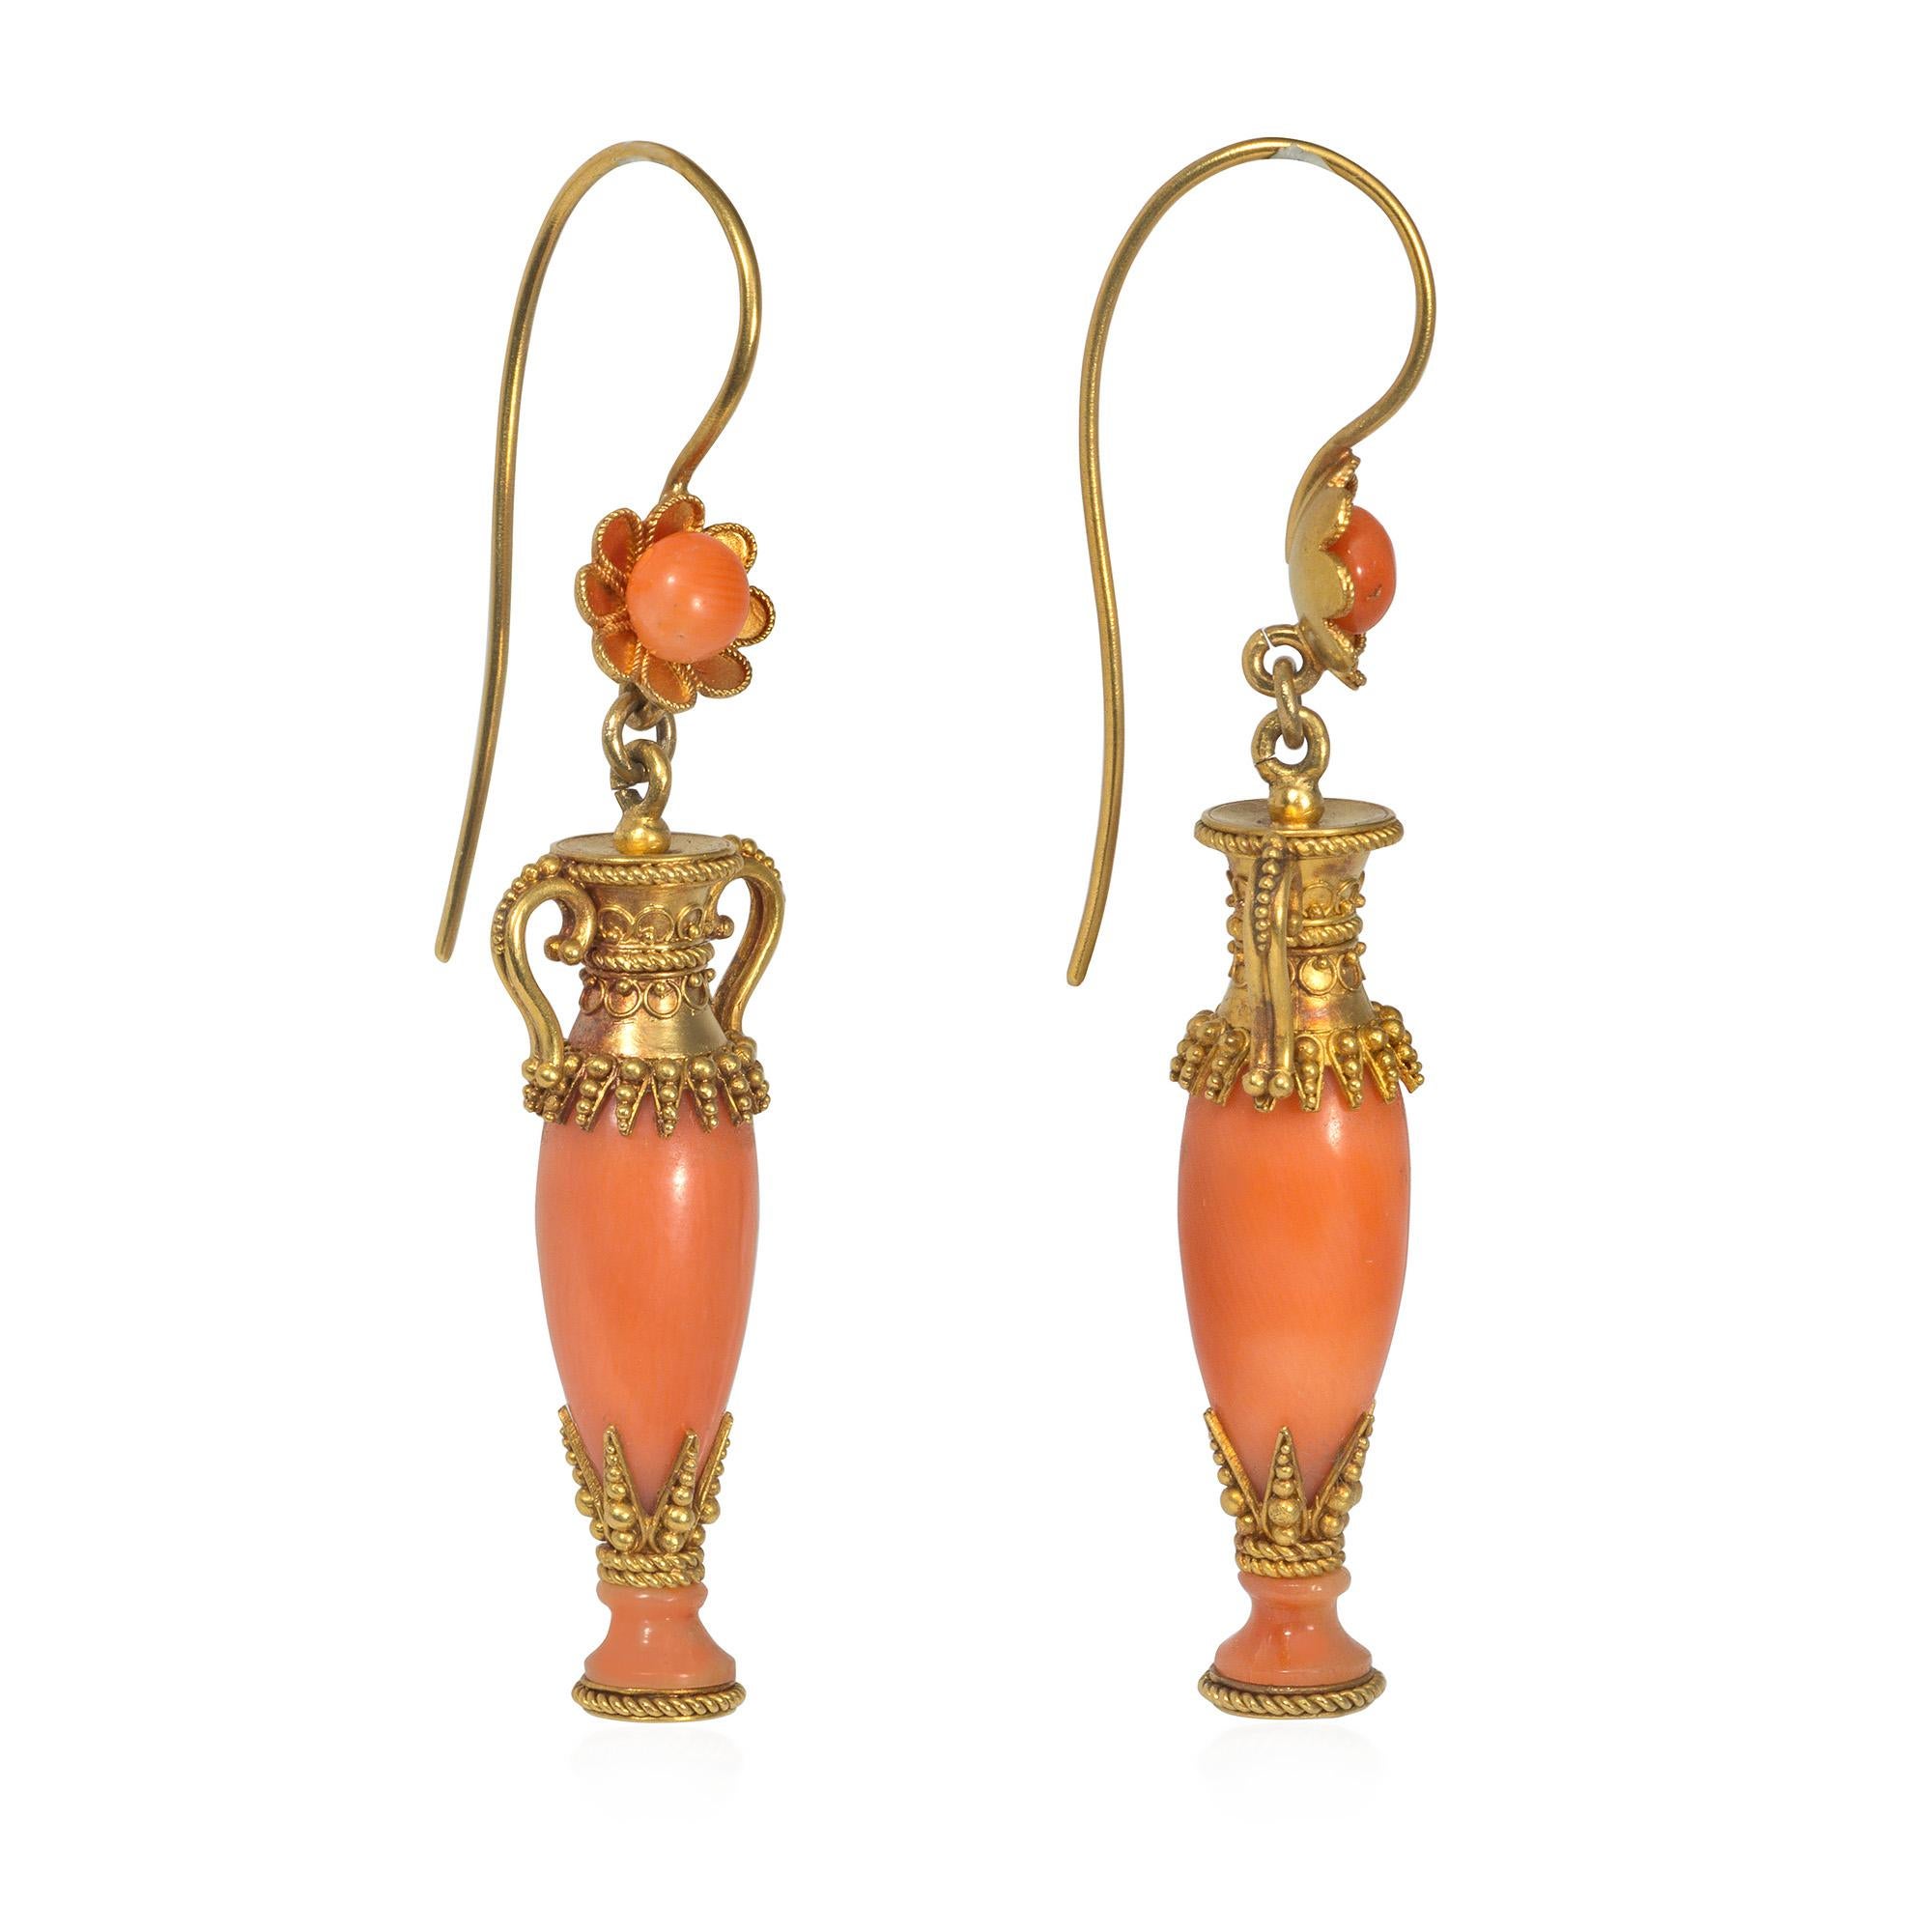 A pair of antique Victorian period gold and coral earrings in the Etruscan style, designed as coral amphorae with applied wire work and granulation, suspending from gold florette surmounts inset with coral beads, in 18k.

Coral, one of the few